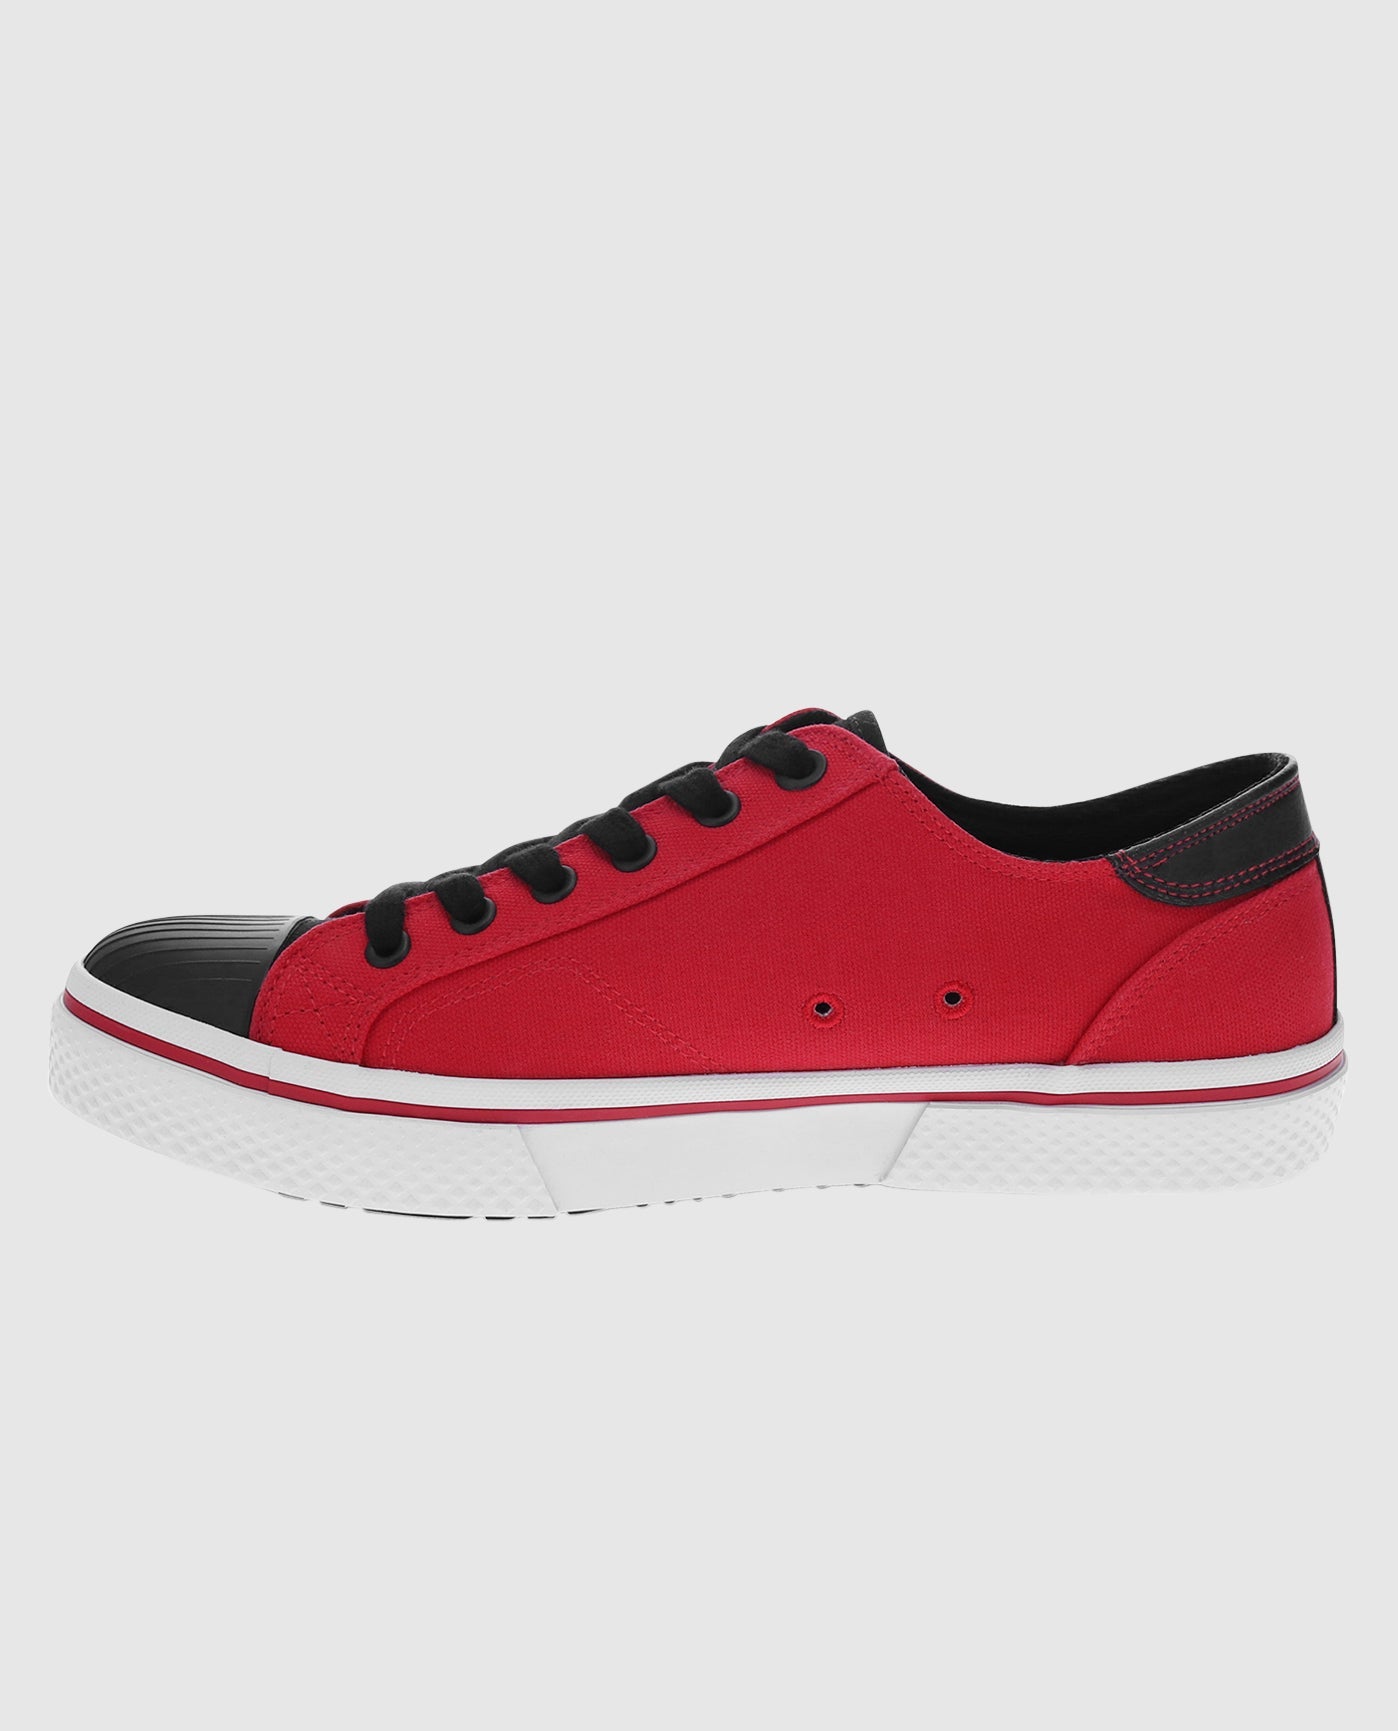 Inside Side View Of Starter Tradition 71 Low Red Single Sneaker | Red